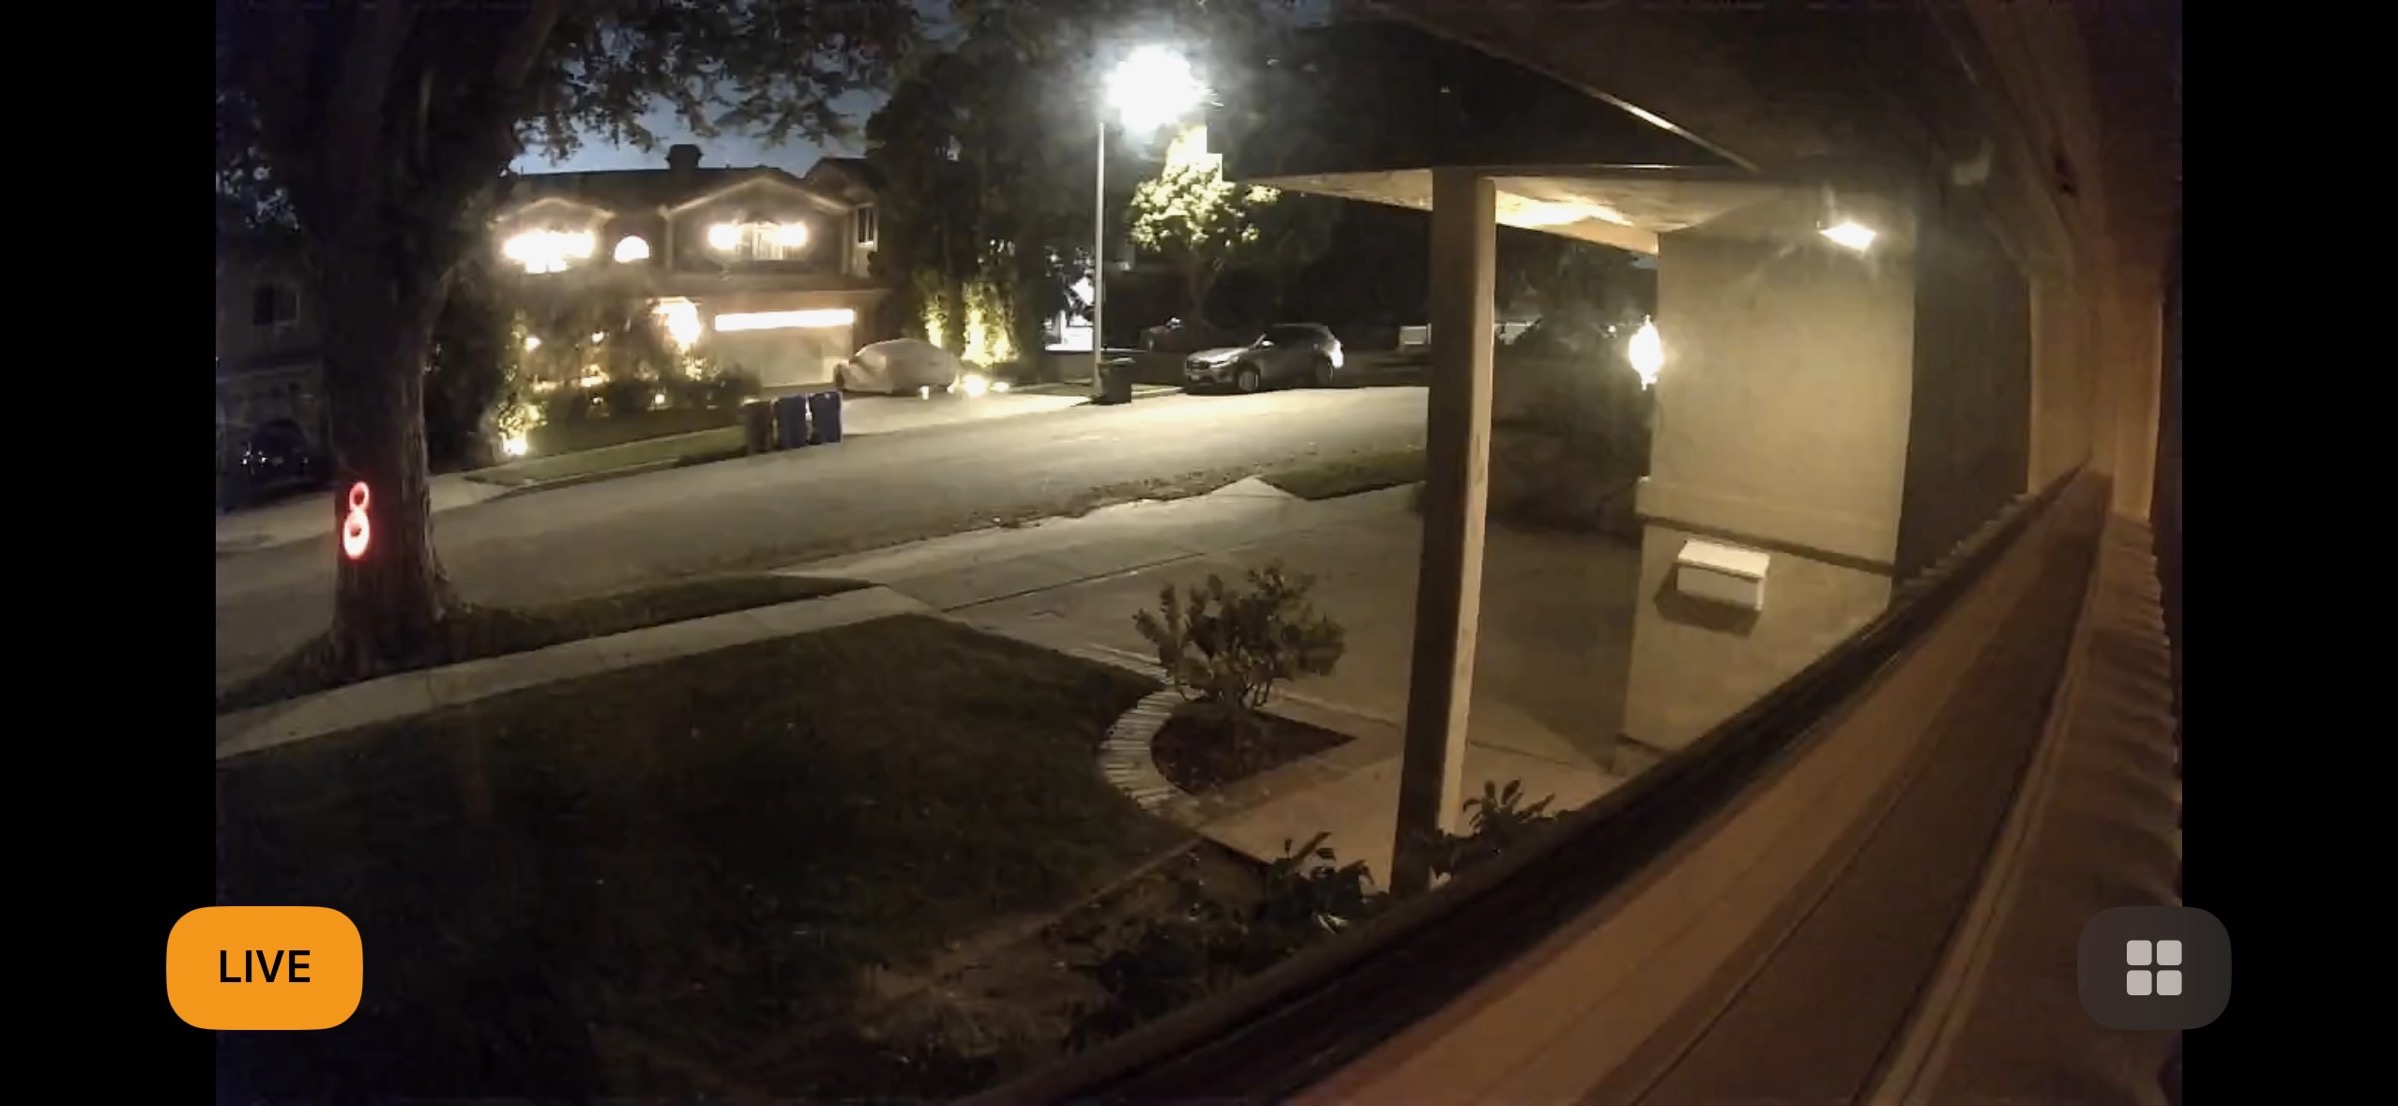 Eufy Cam View at Night Without Night Vision